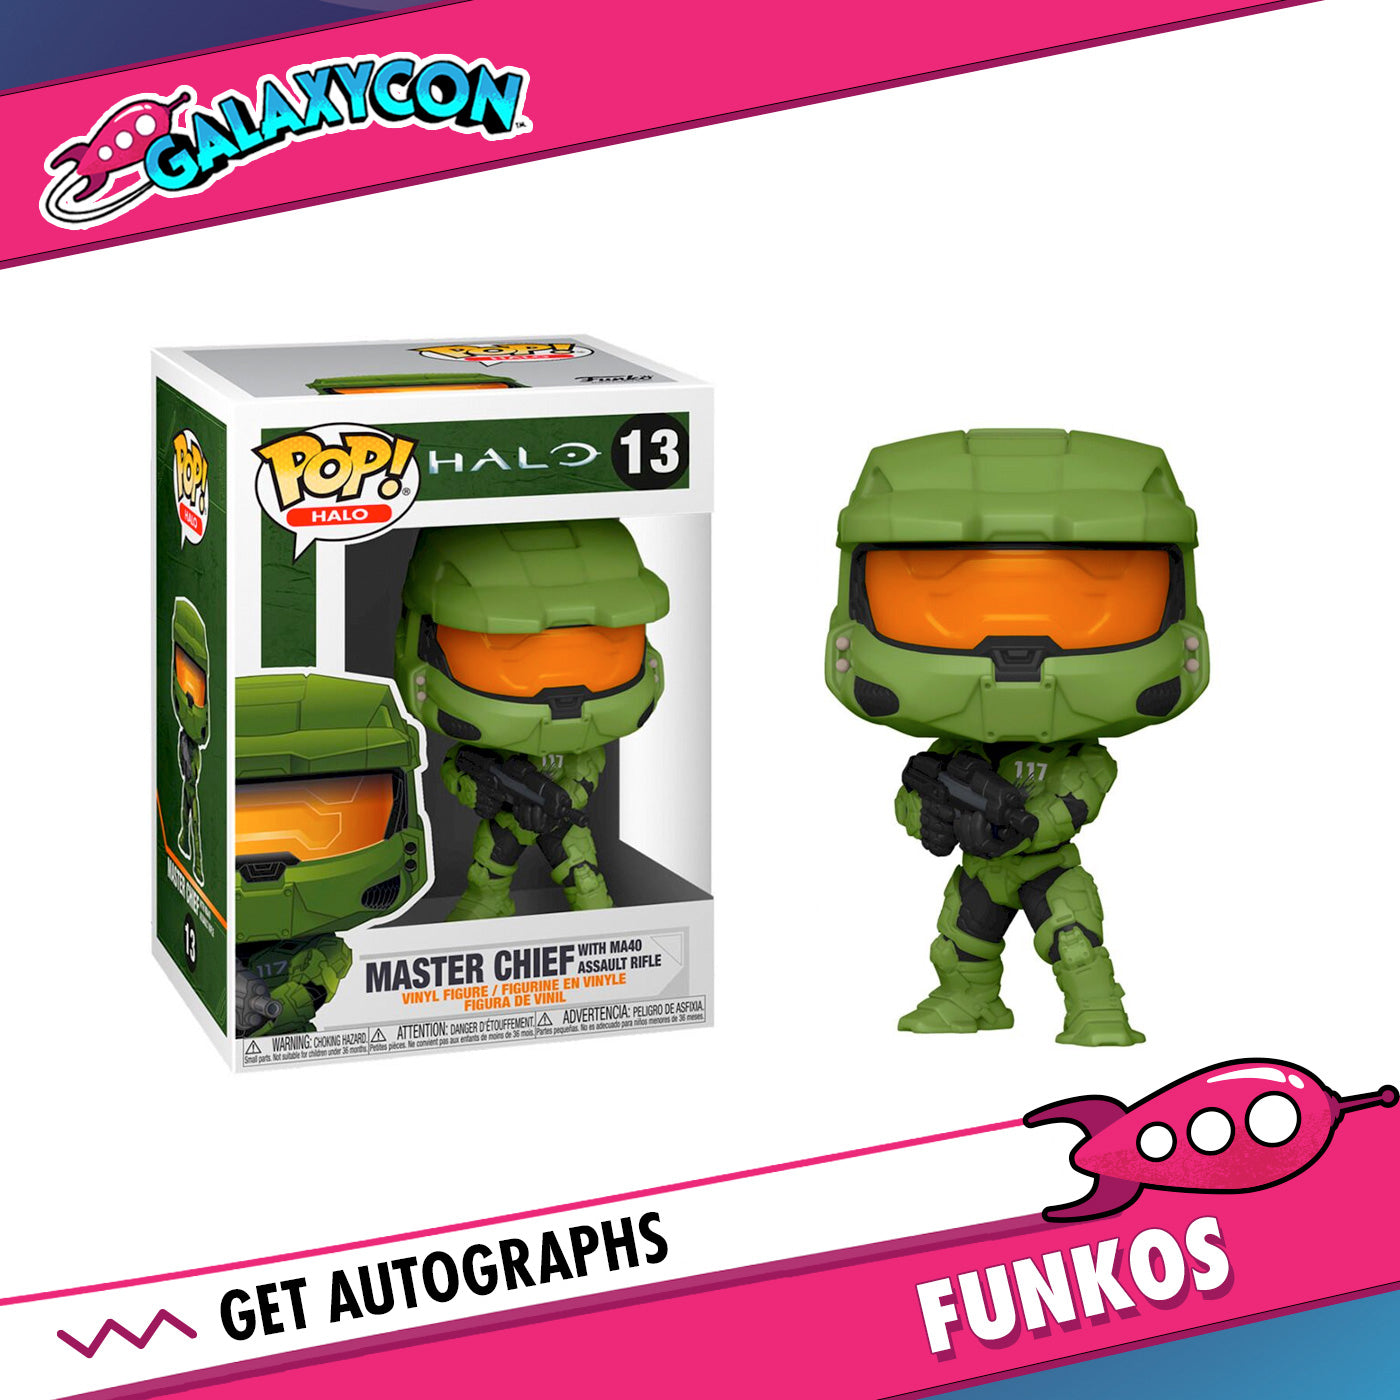 Steve Downes: Autograph Signing on a Funko Pop, November 5th